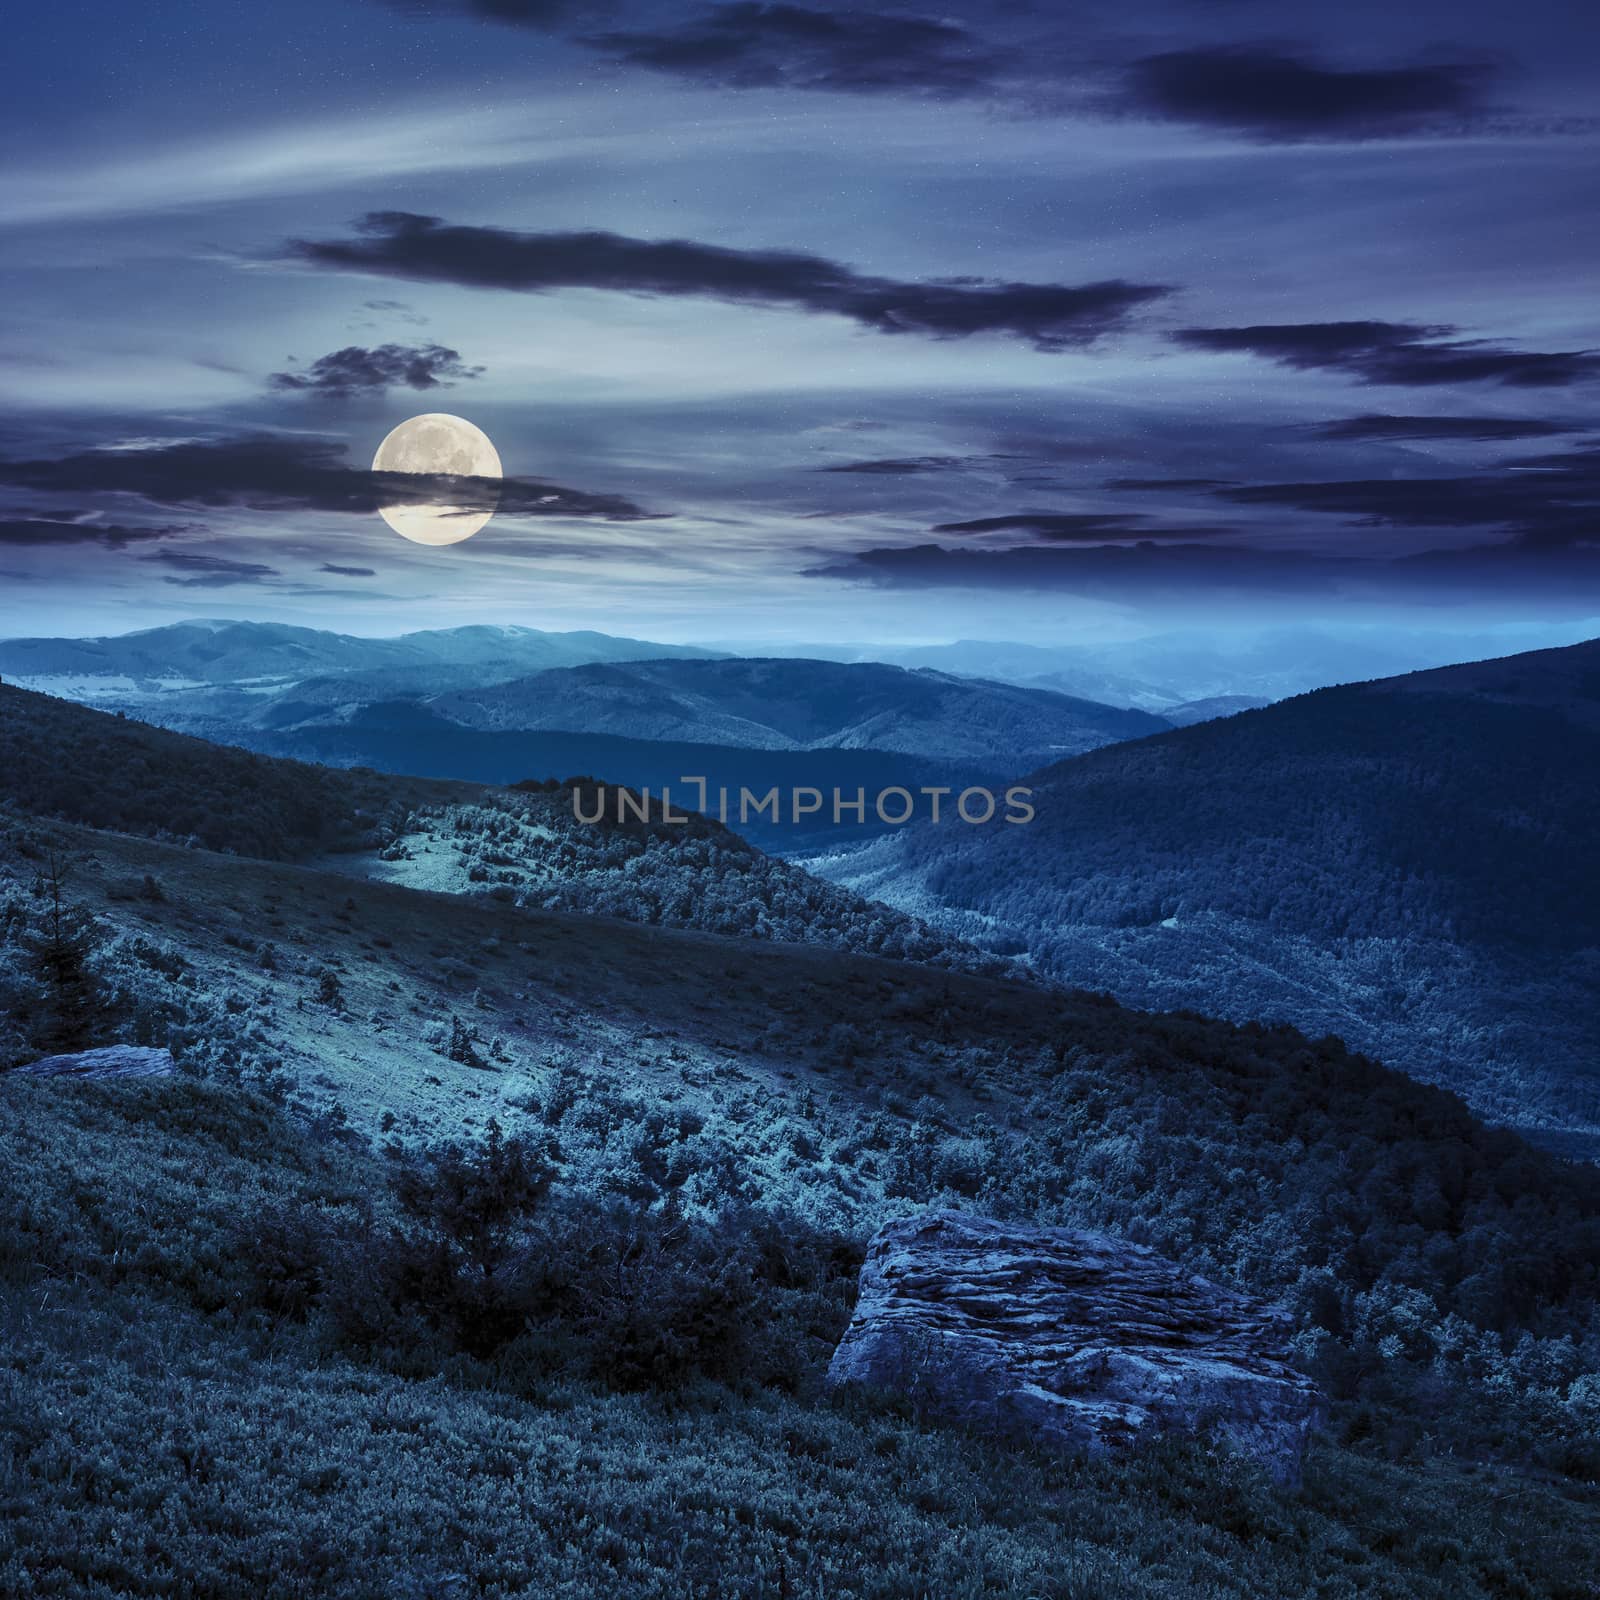 mountain landscape. valley with stones on the hillside. forest on the mountain under the beam of light at the top of the hill at night in full moon light